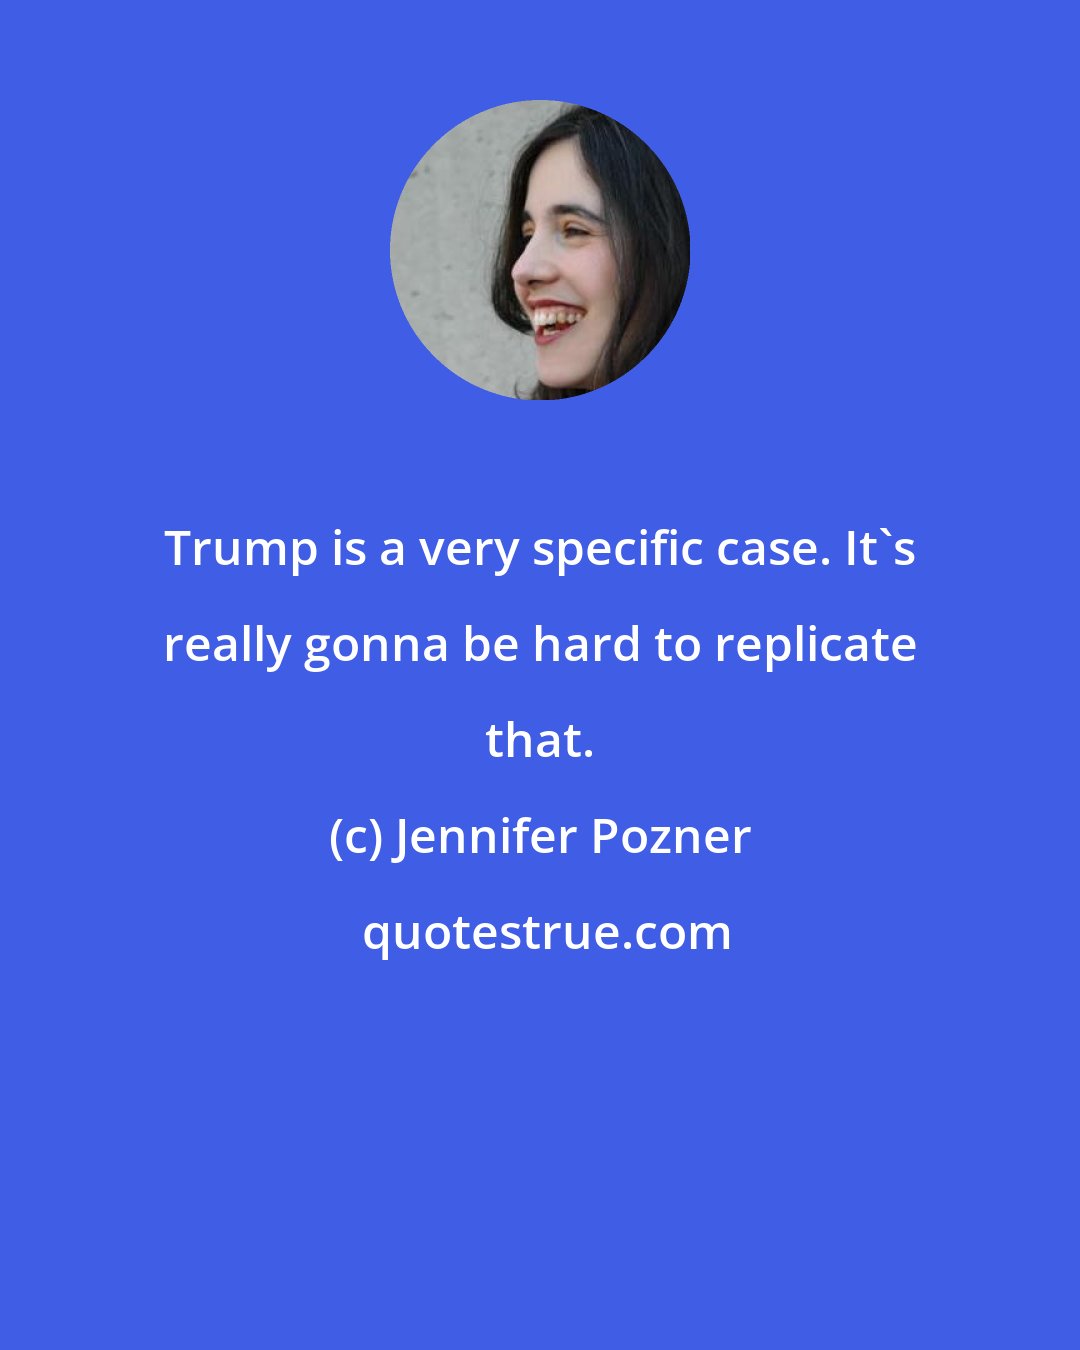 Jennifer Pozner: Trump is a very specific case. It's really gonna be hard to replicate that.